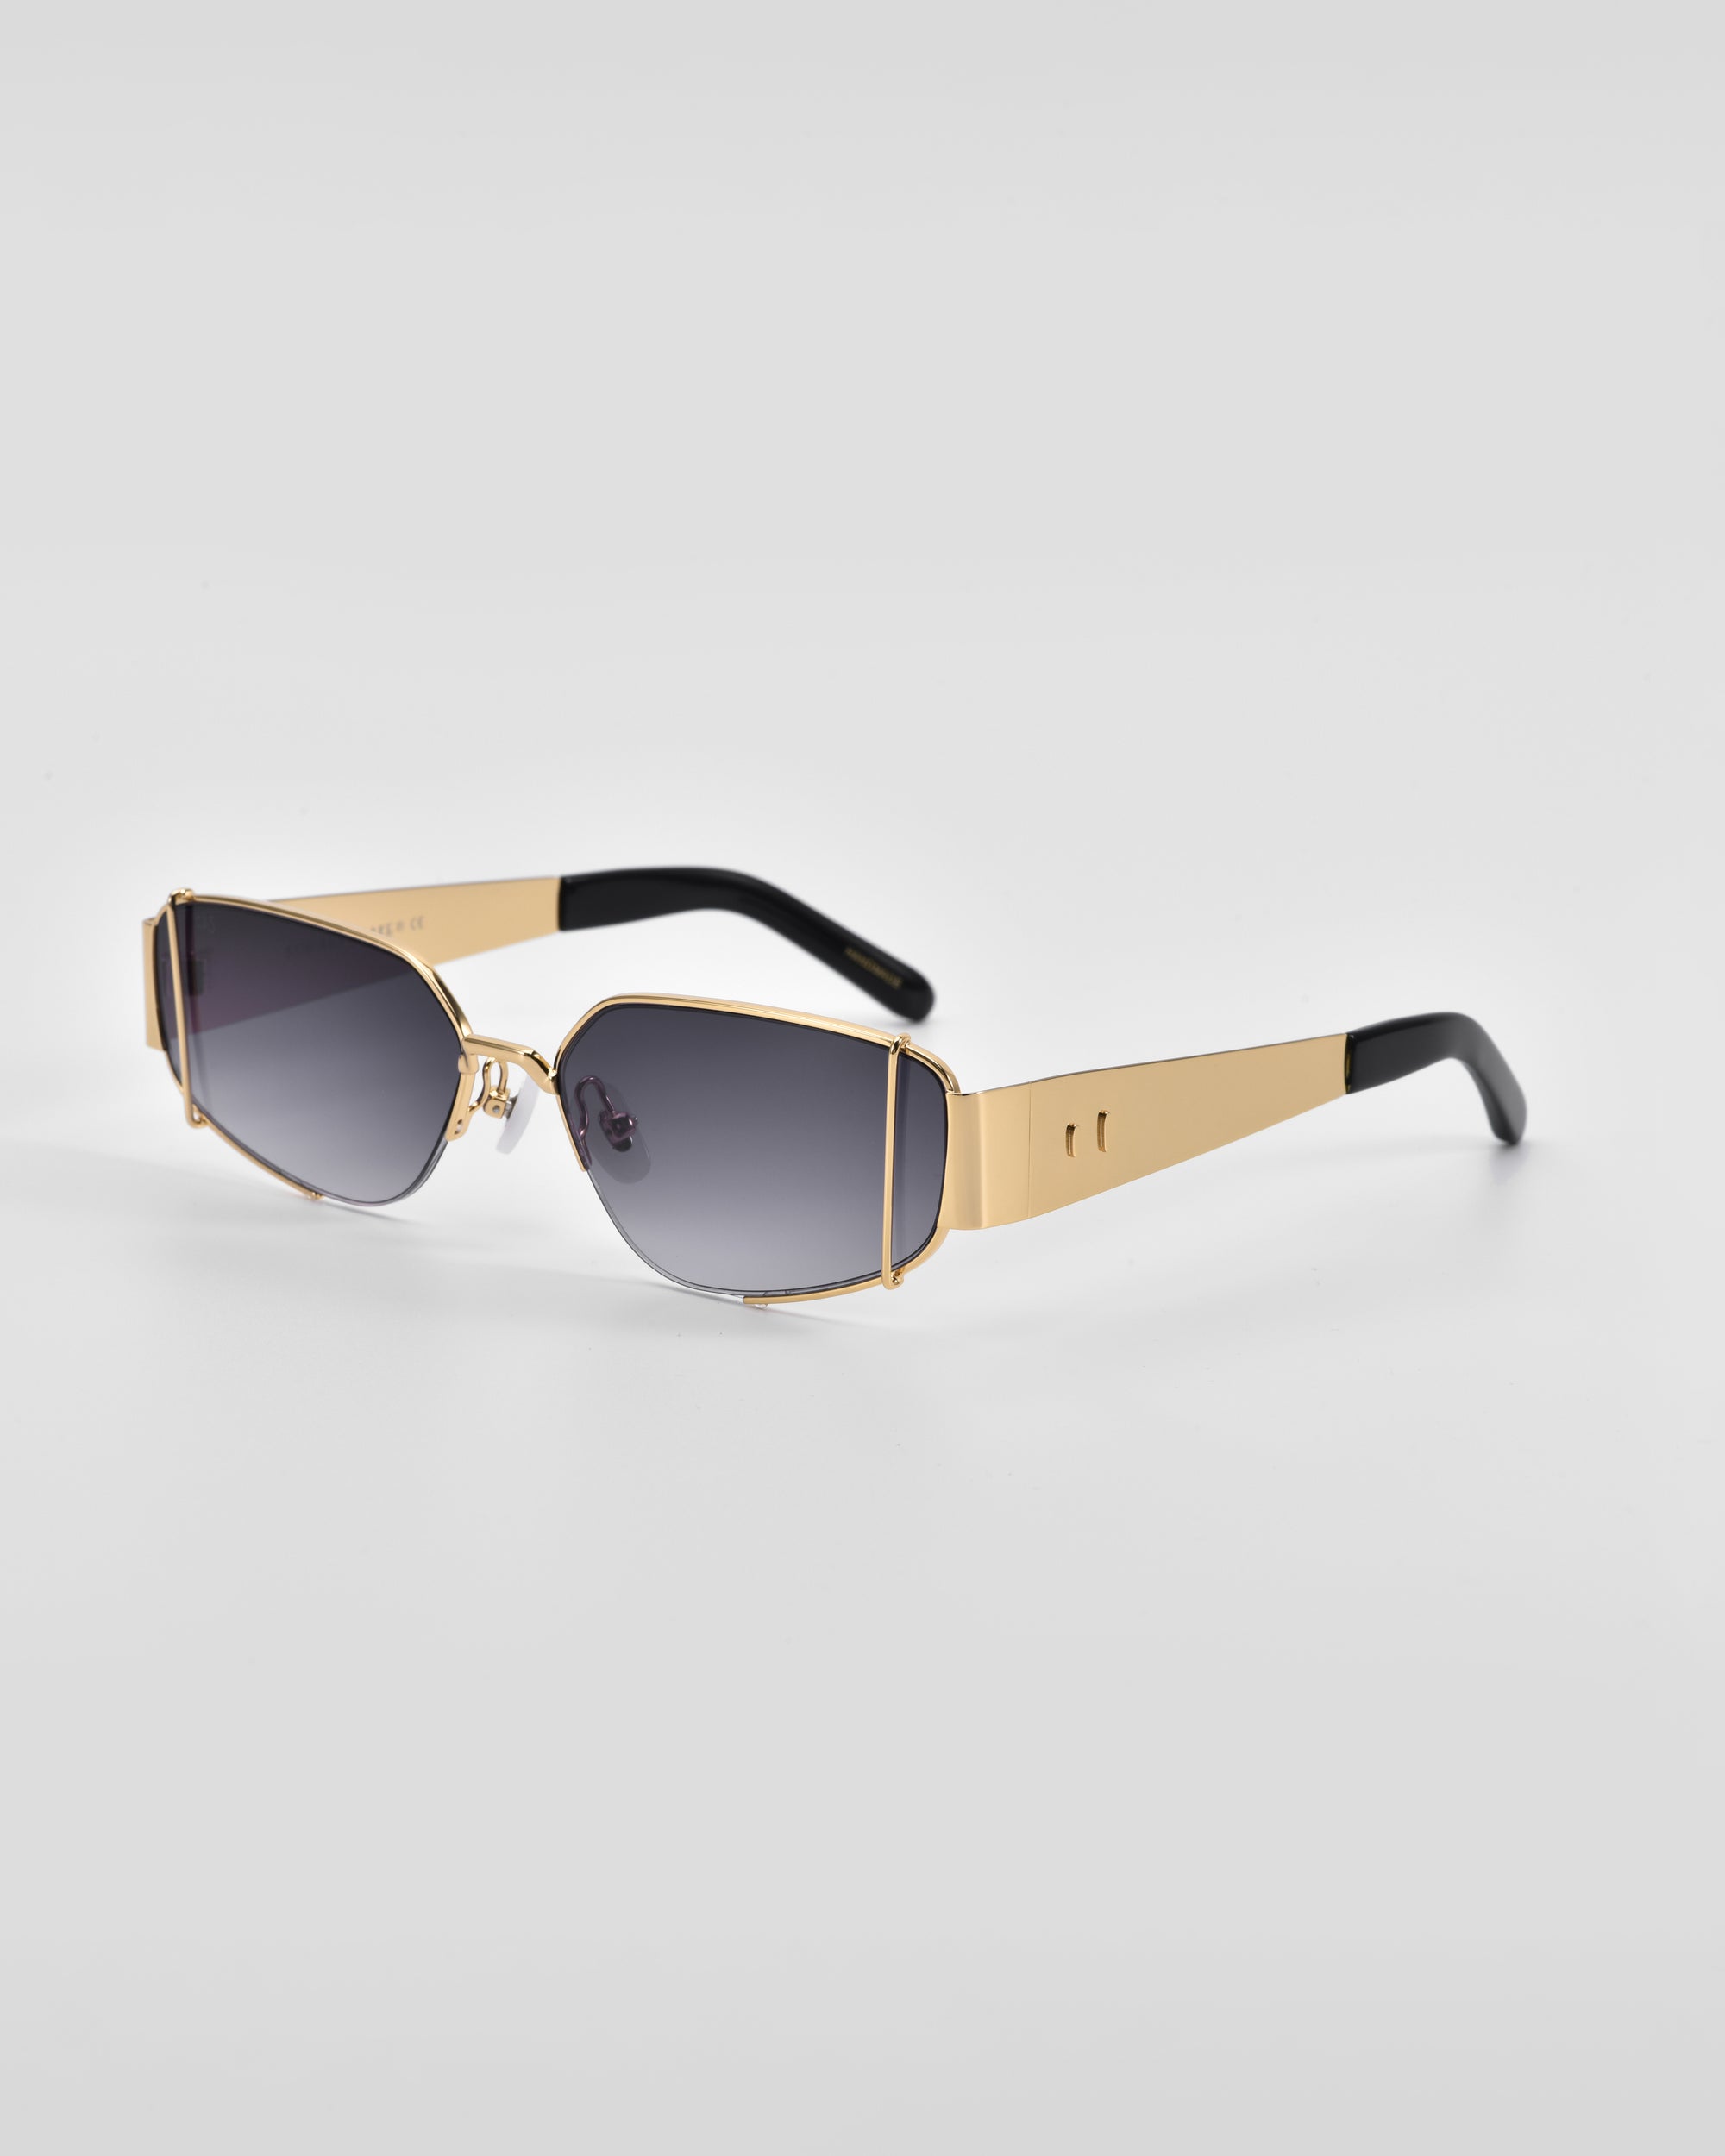 A pair of stylish sunglasses boasting 18-karat gold frames and dark gradient lenses. The temples are wide with a gold finish, transitioning to black at the ends. The plain white background accentuates the luxurious and contemporary design of these For Art&#39;s Sake® Talia metal-framed sunglasses.